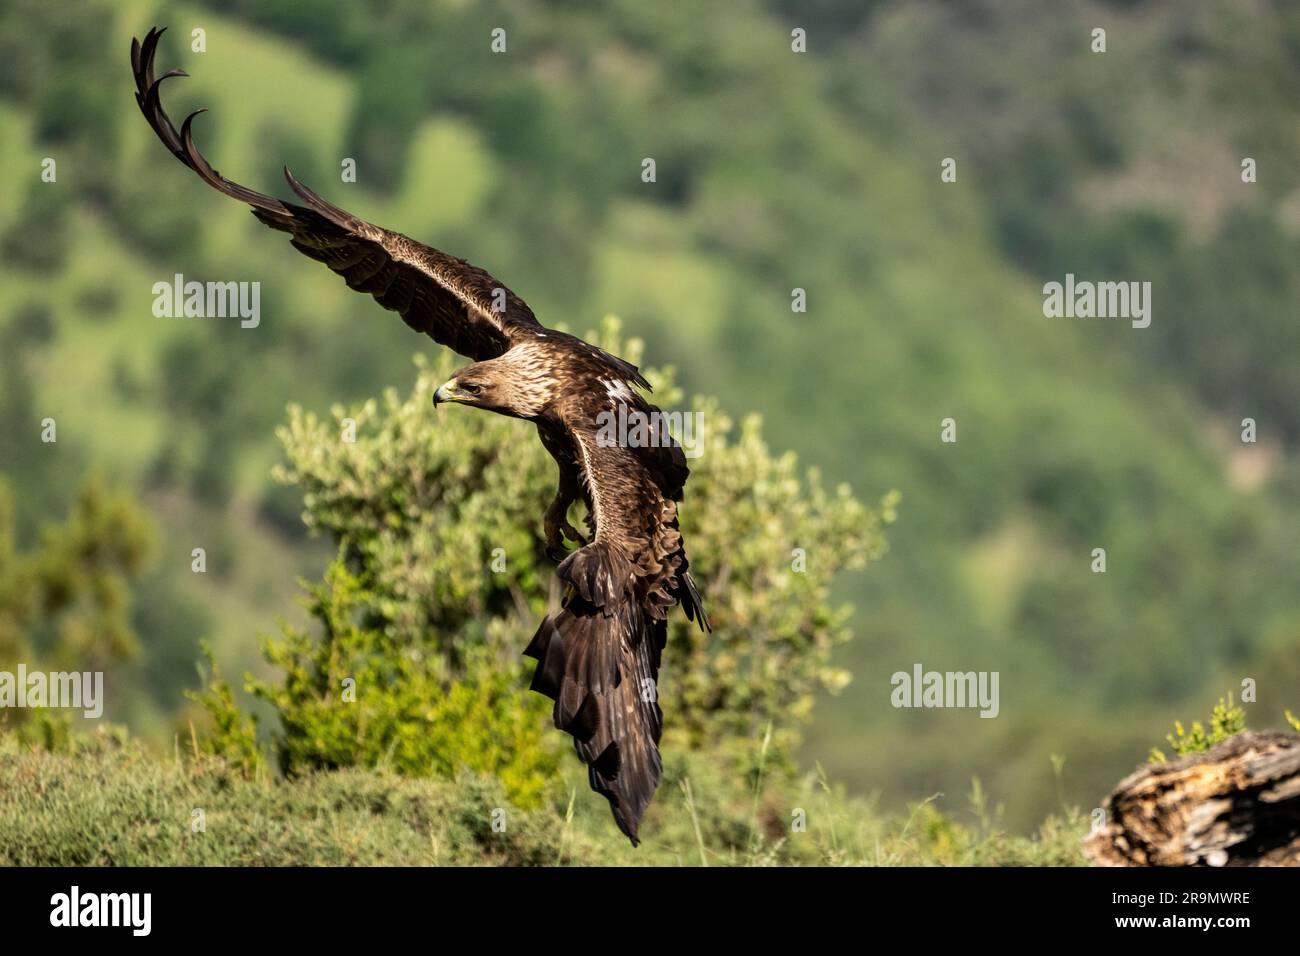 The golden eagle (Aquila chrysaetos) Photographed in the Pyrenees Mountains, Spain Stock Photo